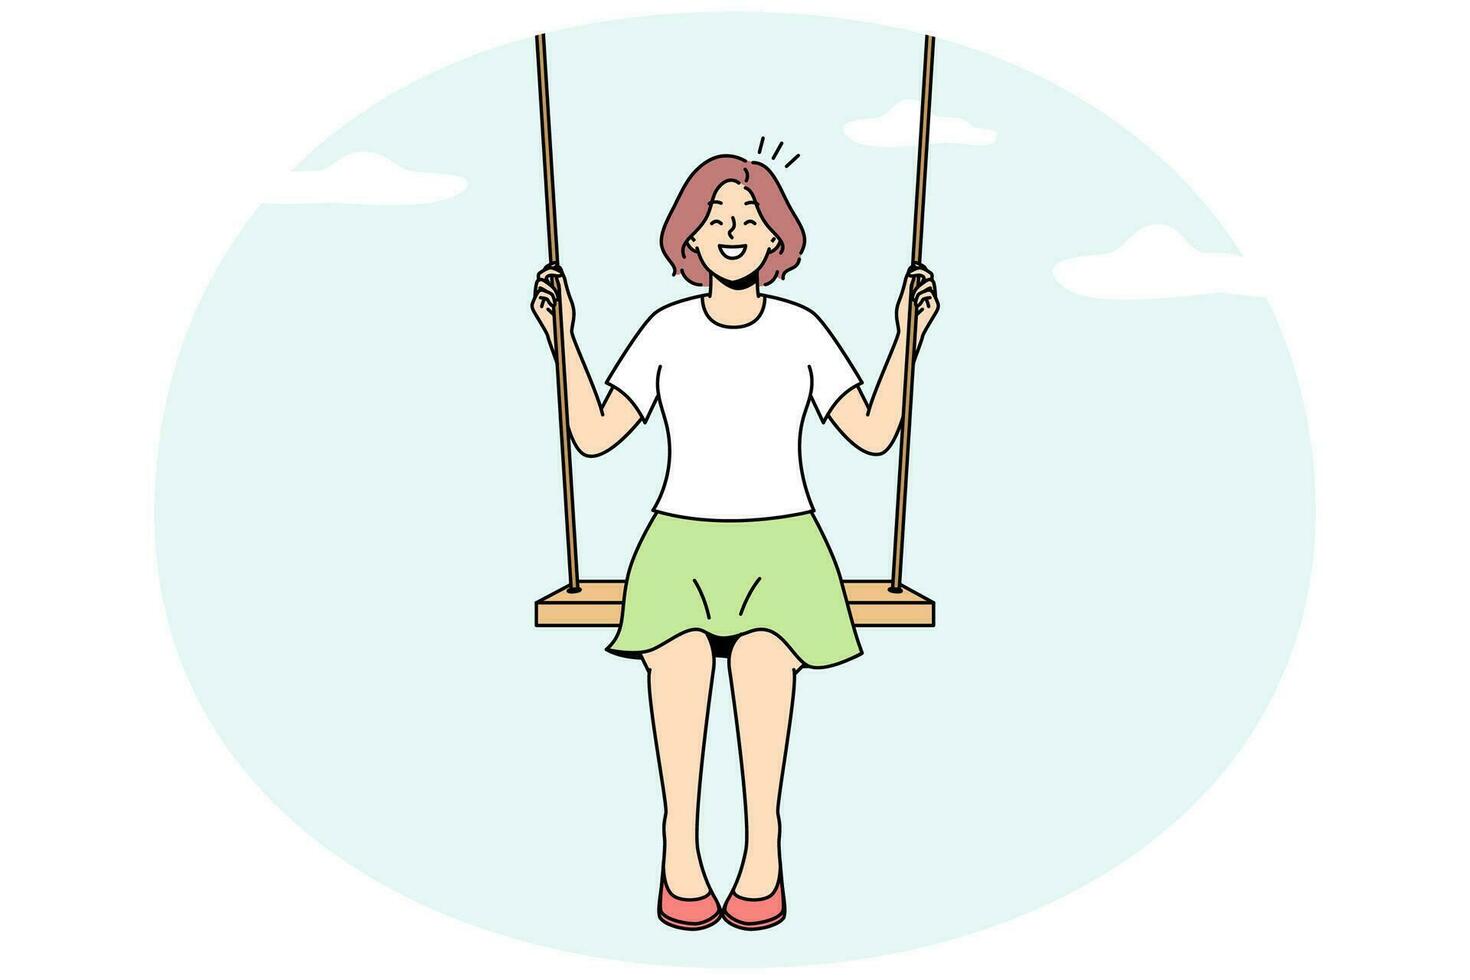 Smiling young woman sit on swing in clouds dreaming. Happy girl swaying on tilt in sky. Dreamer and visualization. Vector illustration.